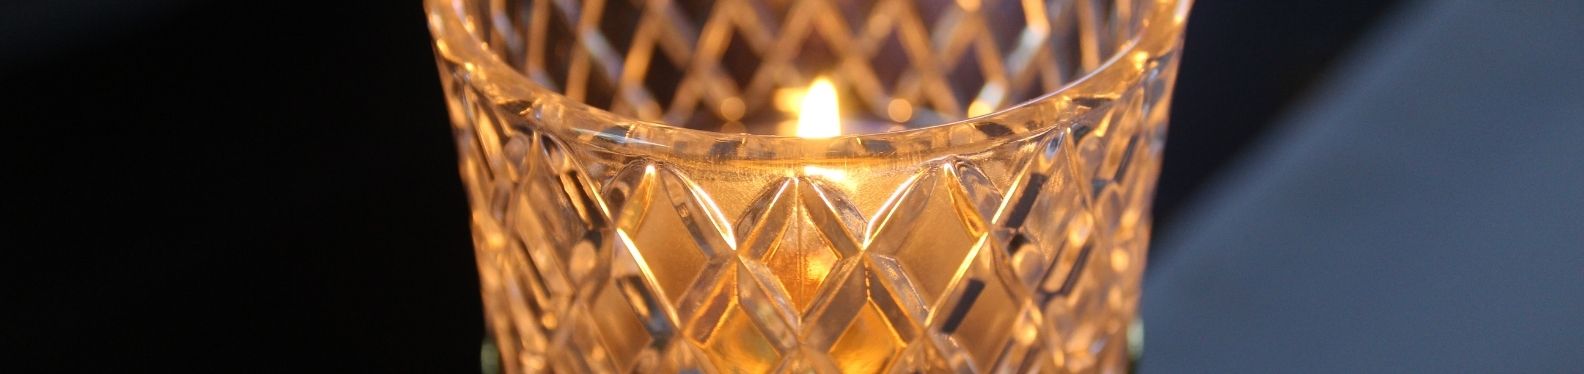 Photo of an altar candle lit, zoomed in.